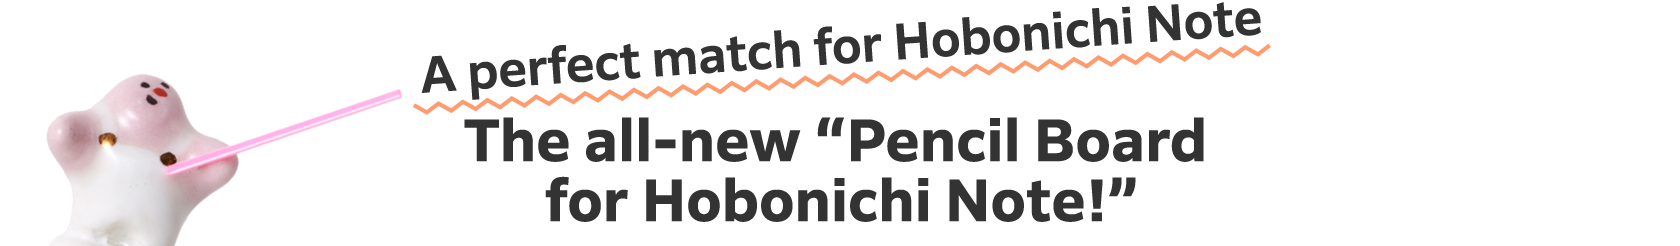 A perfect match for Hobonichi Note
                The all-new “Pencil Board for Hobonichi Note!”